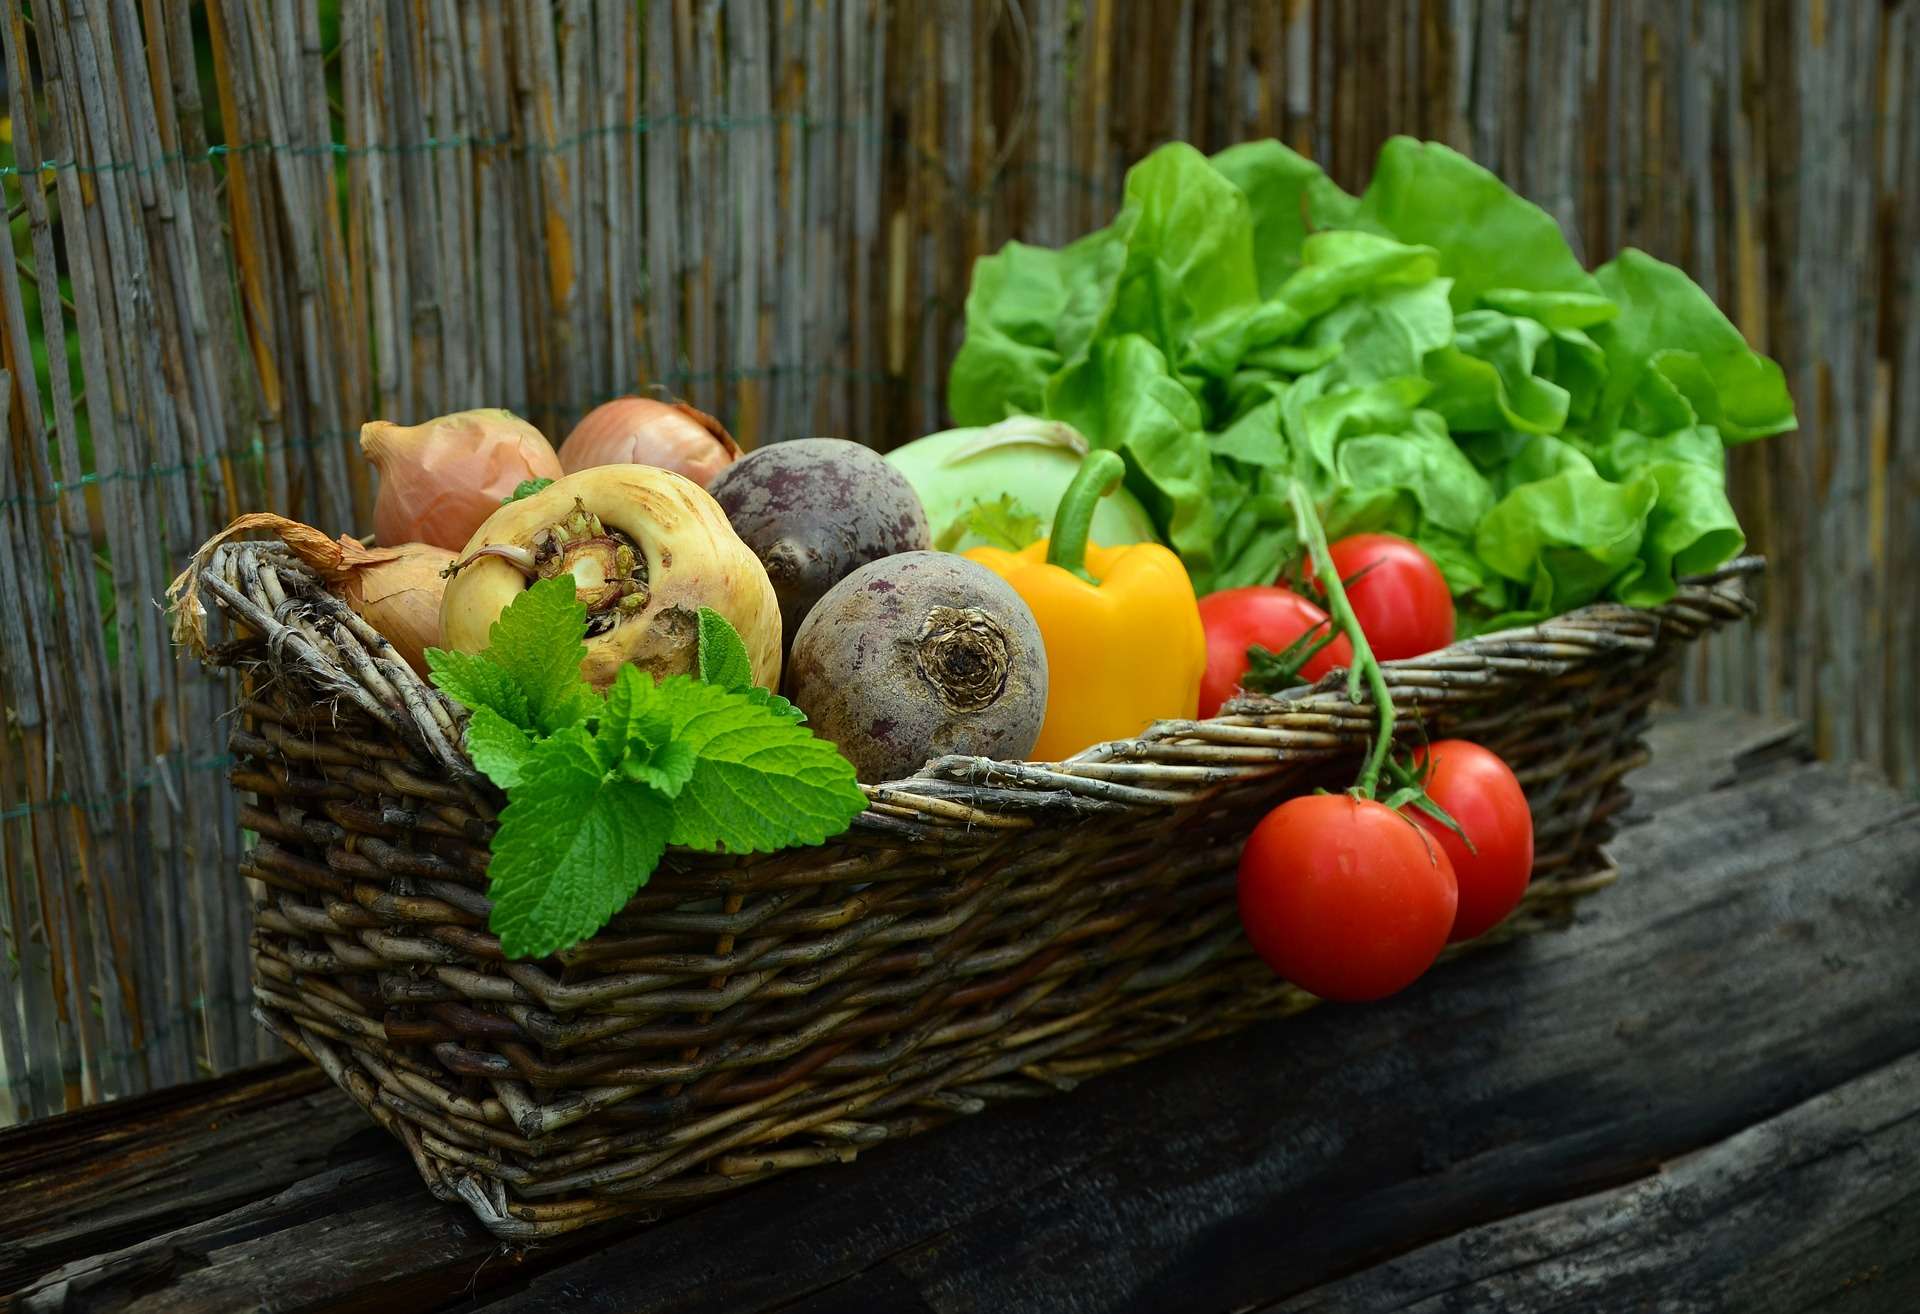 Organic Food Are Nutritional and Environmental Benefits: Overrated?